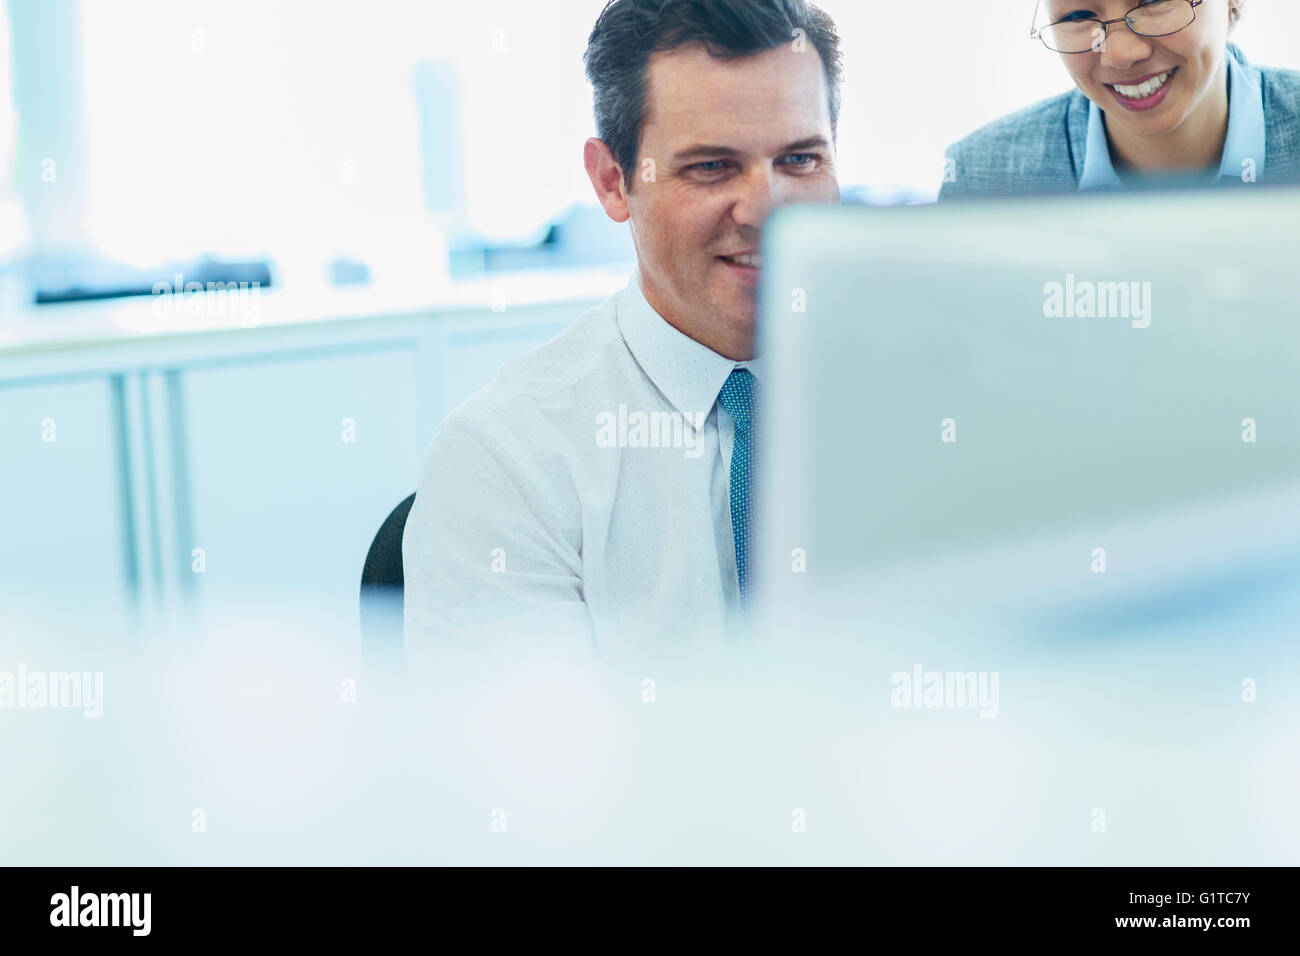 Business people working at computer in office Stock Photo